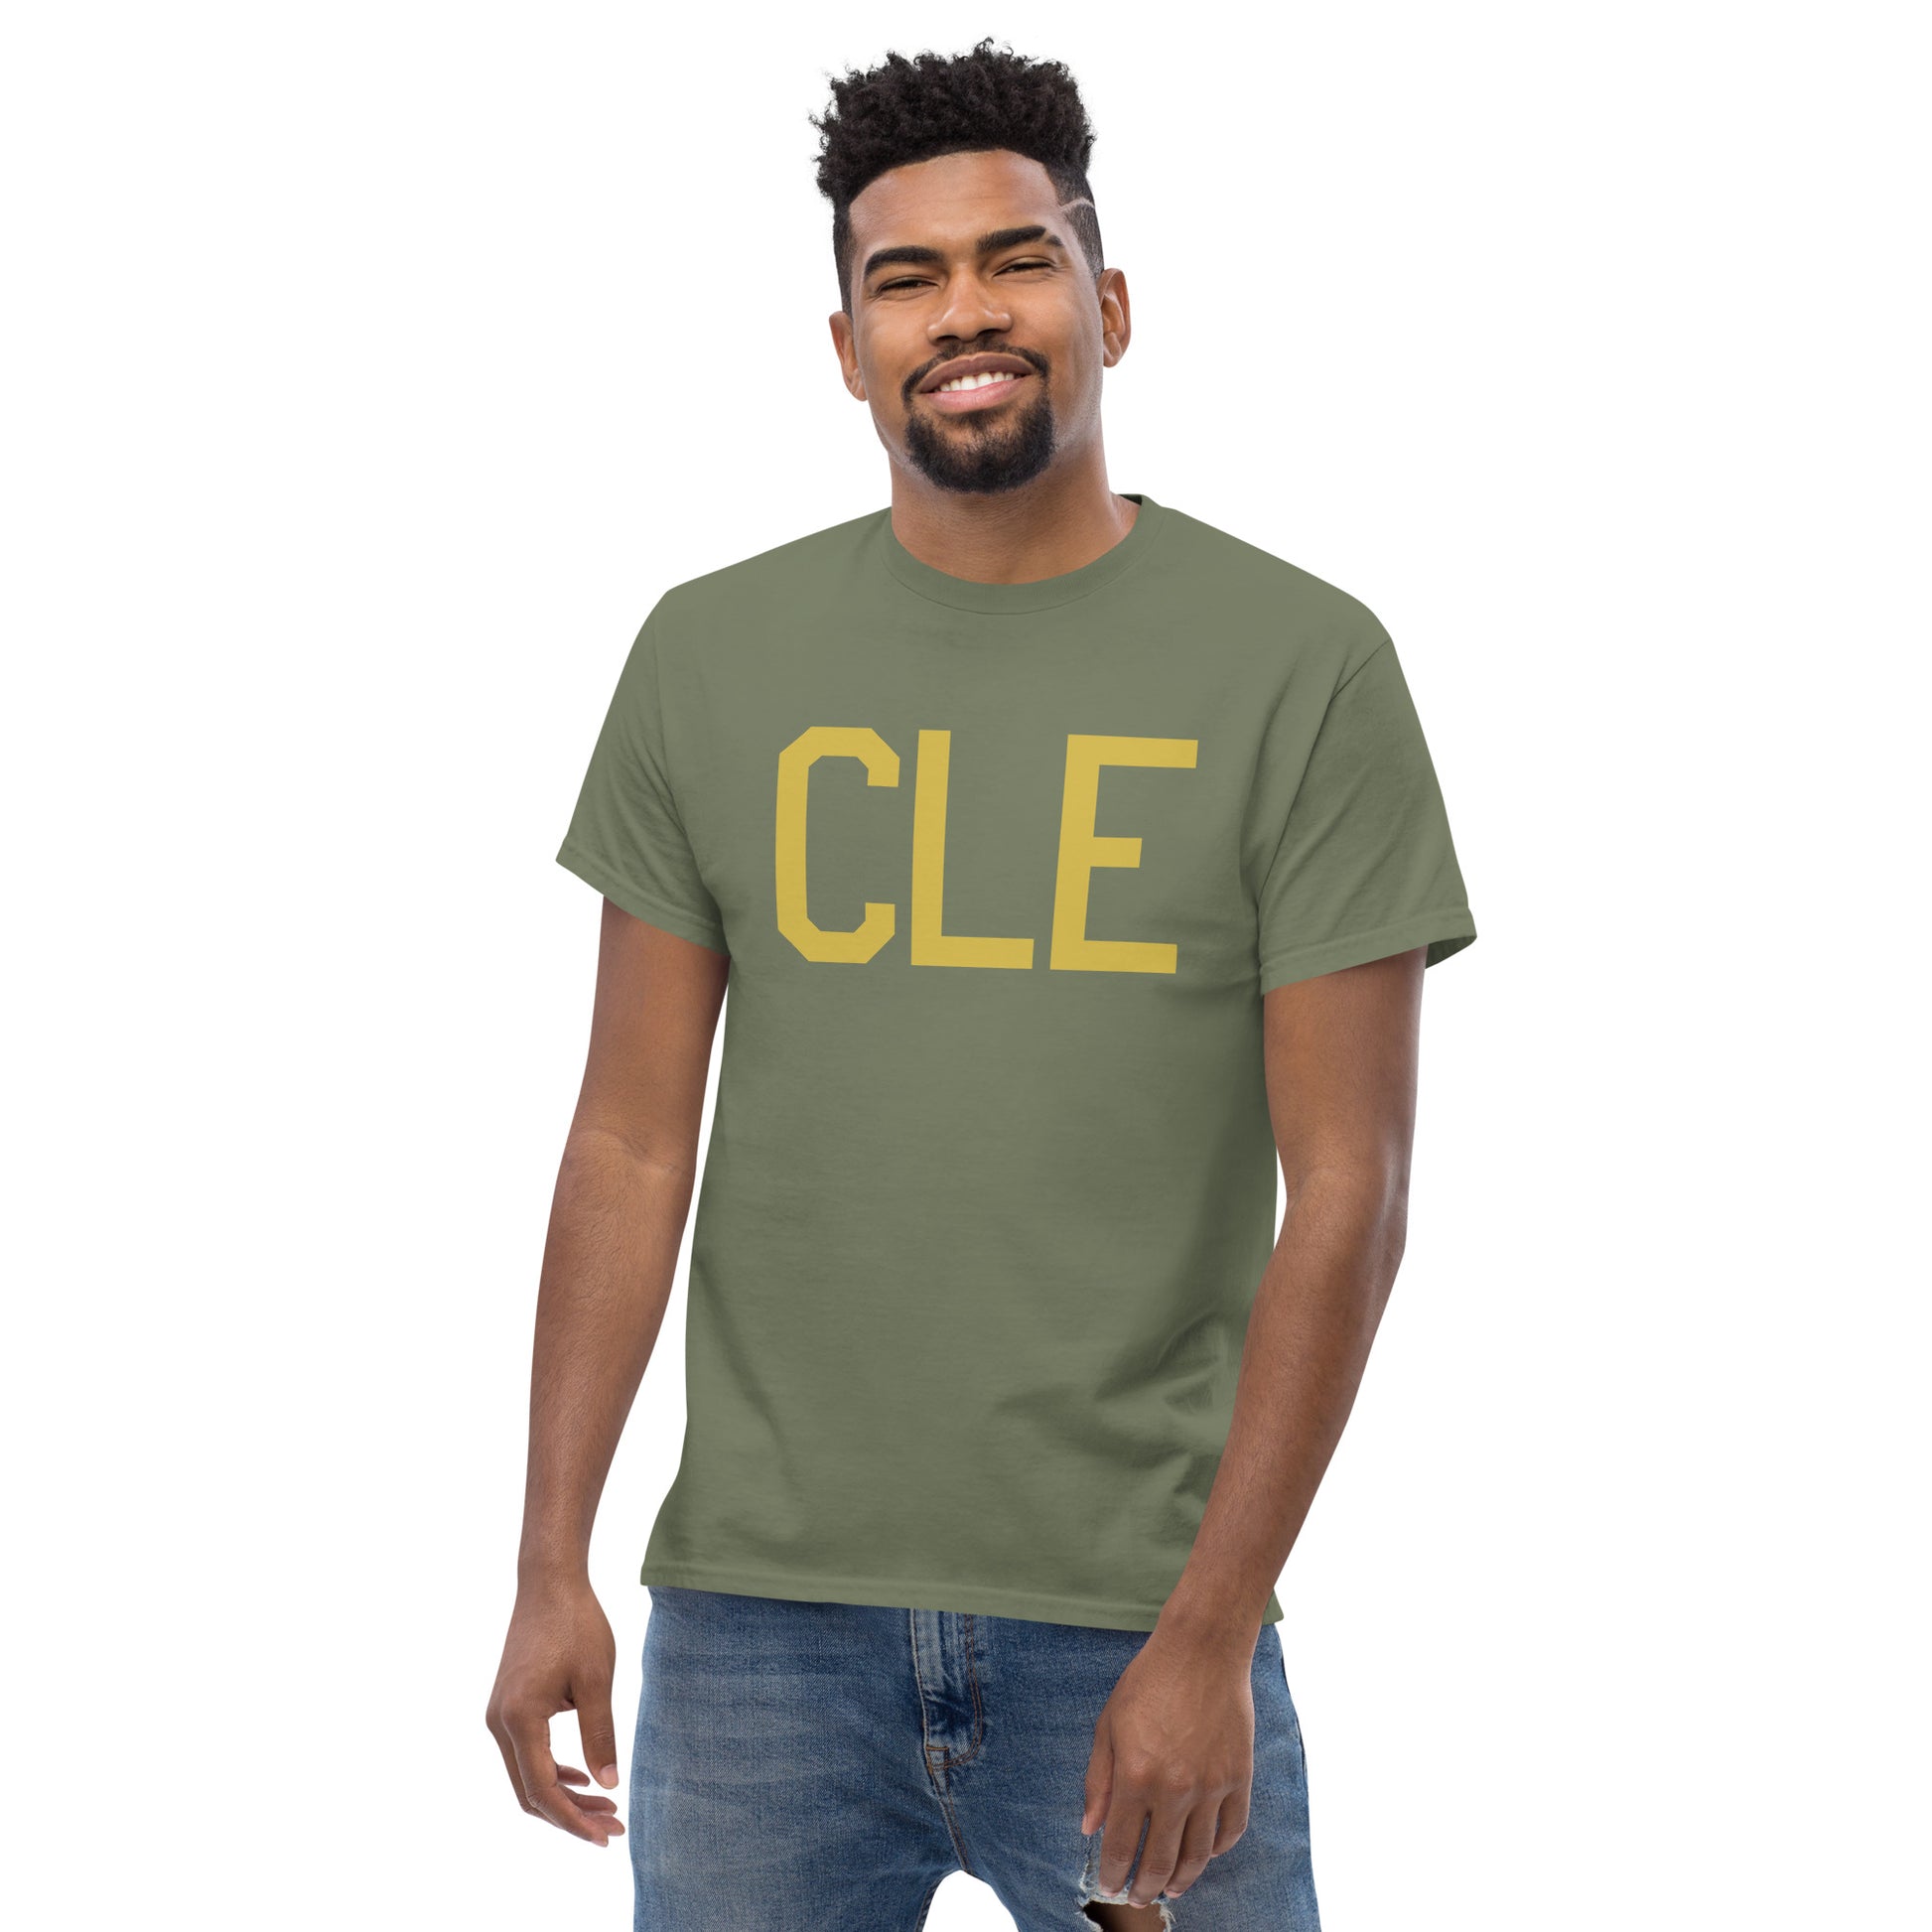 Aviation Enthusiast Men's Tee - Old Gold Graphic • CLE Cleveland • YHM Designs - Image 06